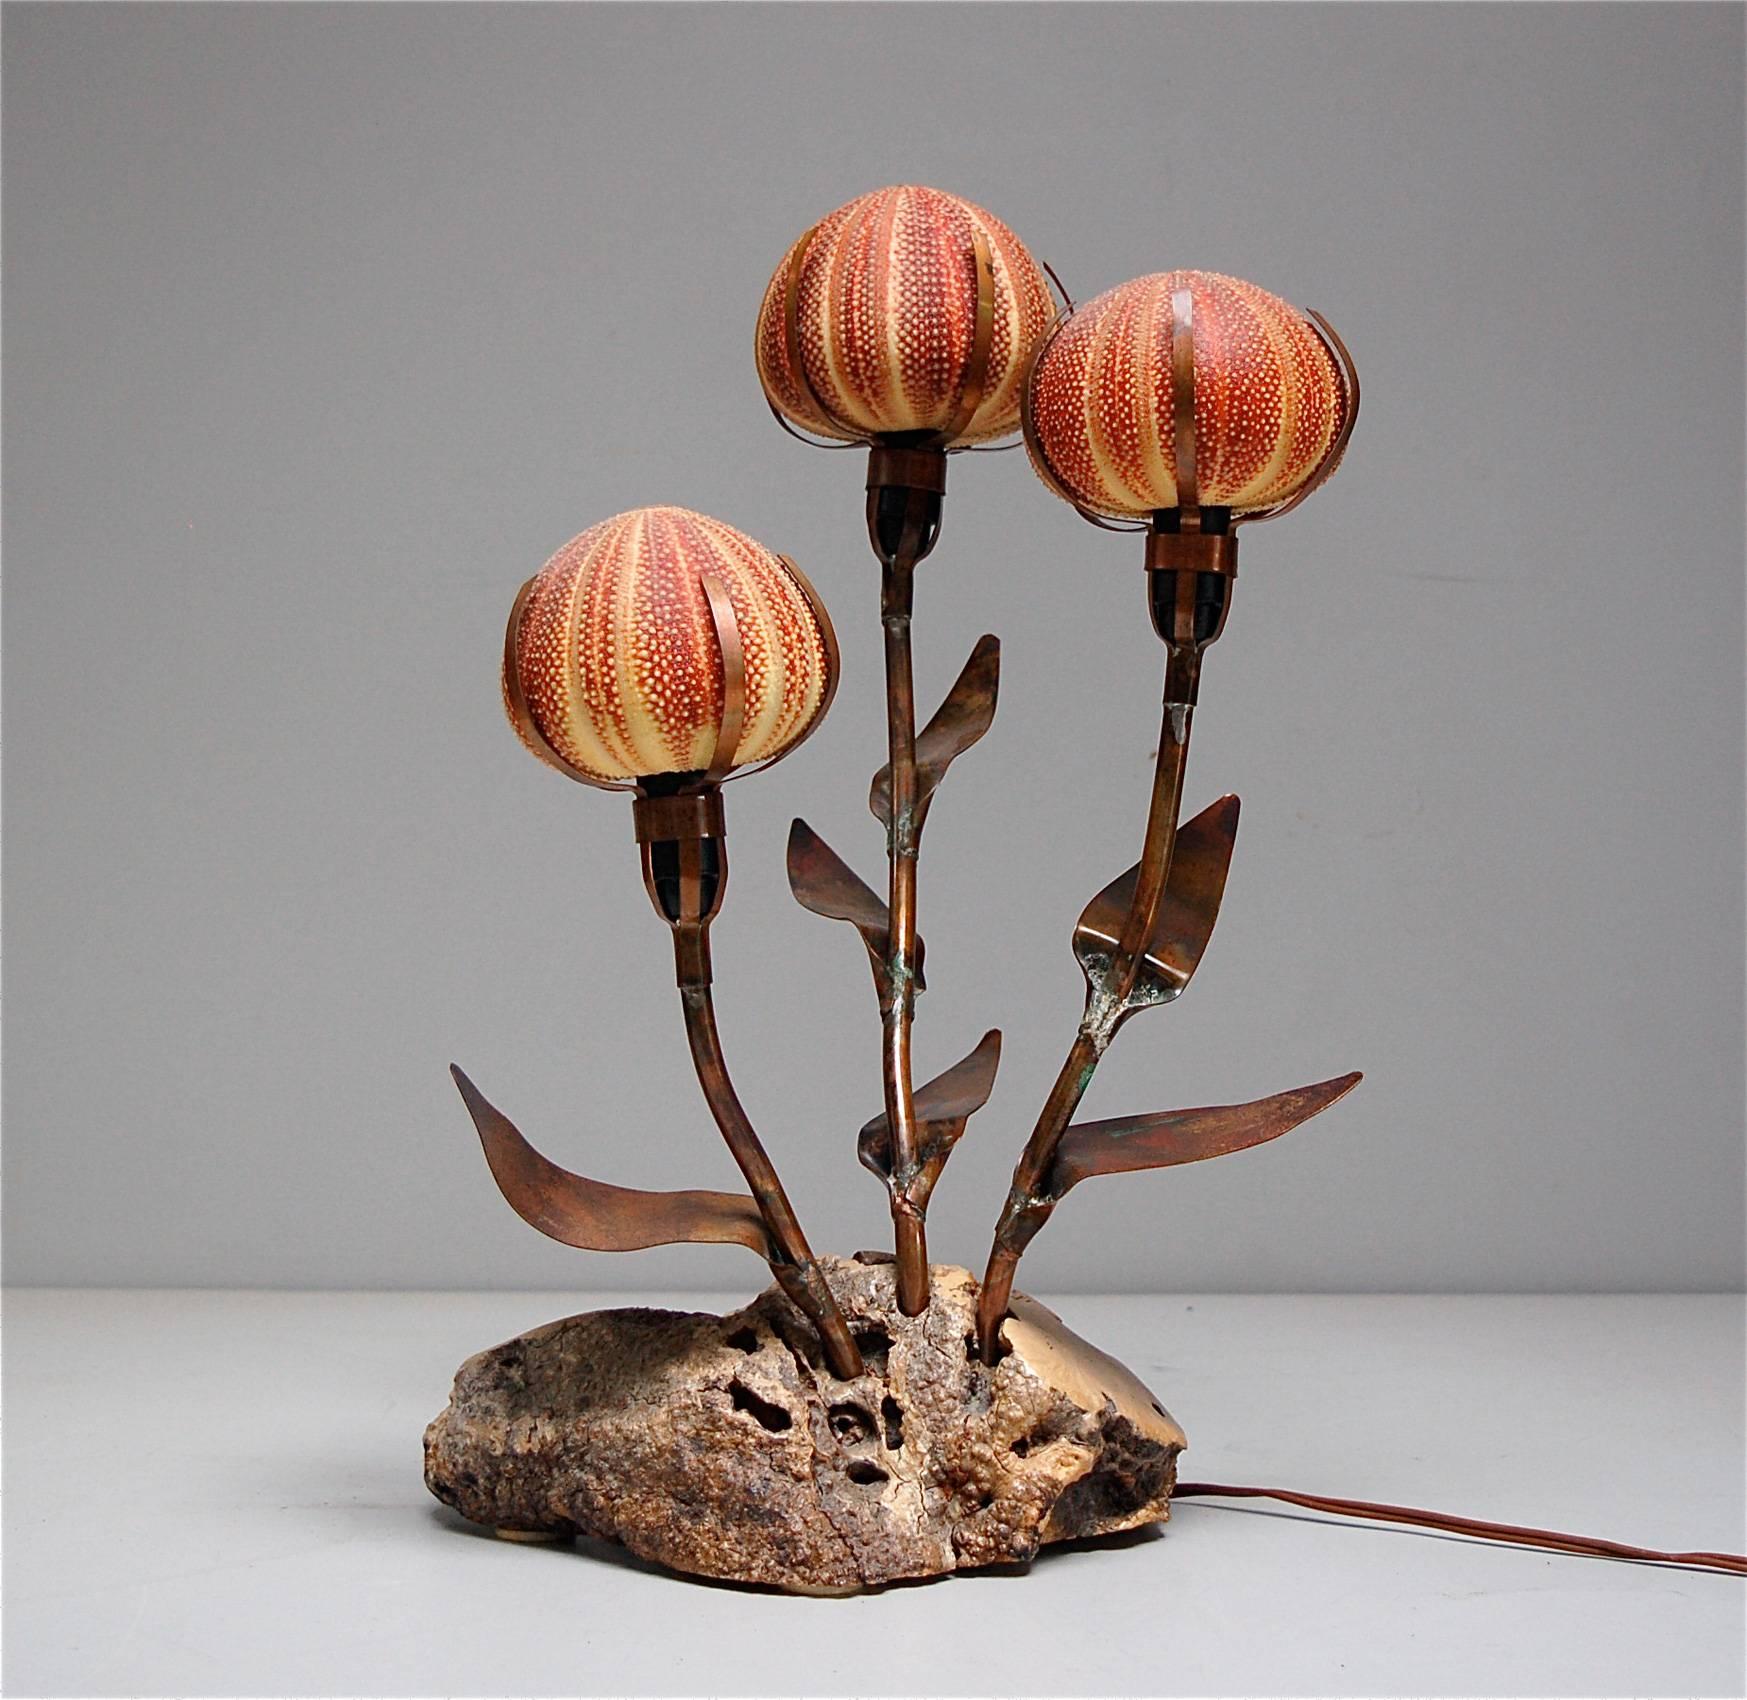 Eye-catching, sculptural lamp made with the shells of three sea urchins. When lit, they produce an amazing warm glow. The shape of the shell is quite bulbous which is why it lends itself so well to creating the illusion of flowers. The metal stems